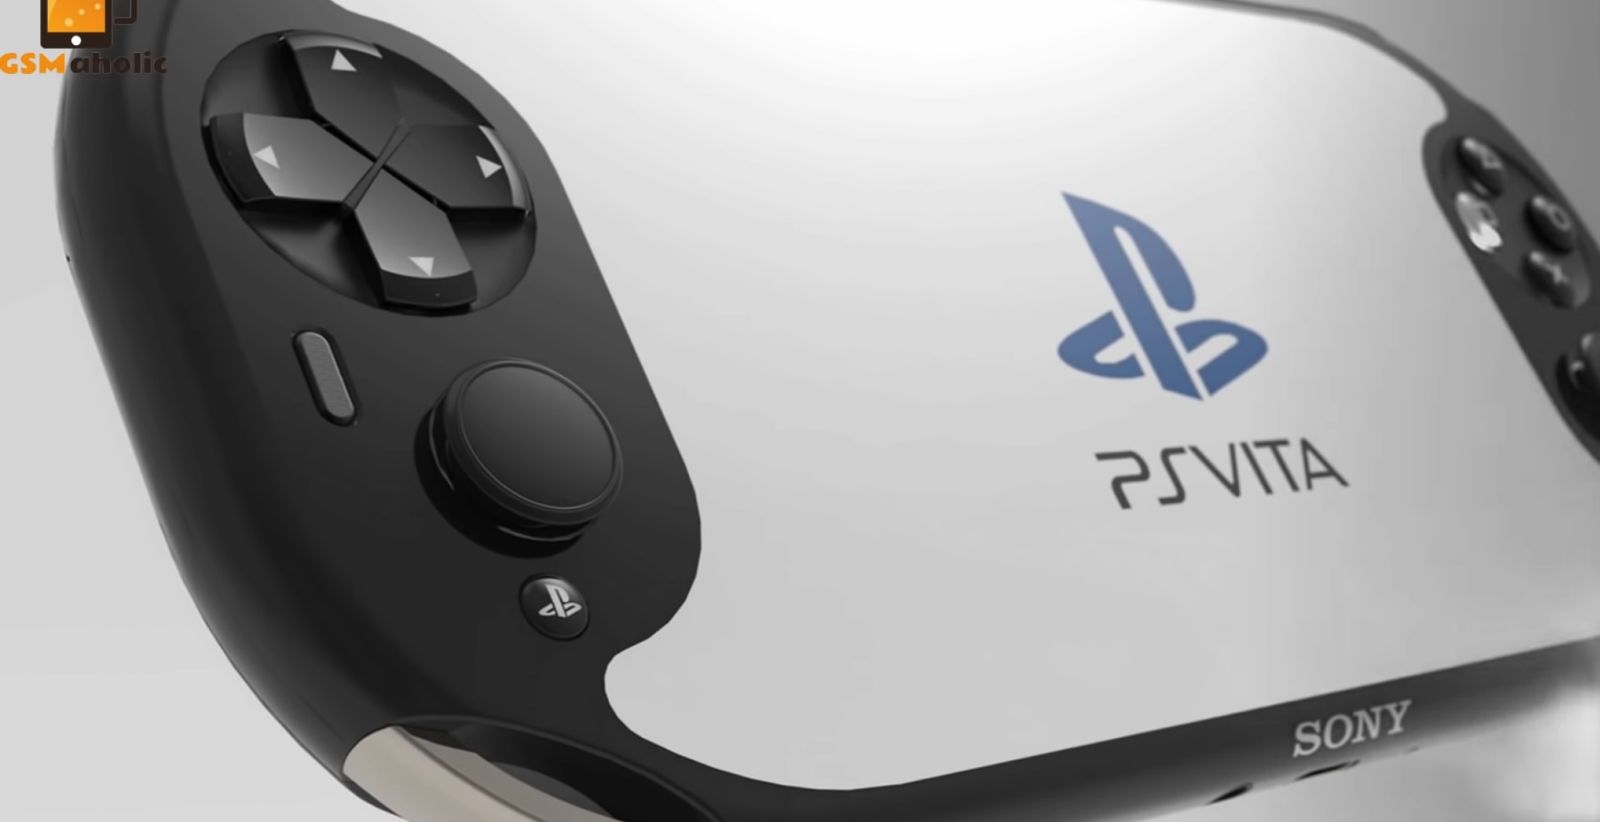 Sony Playstation PS Vita X 5G is A New Portable Console Dream 